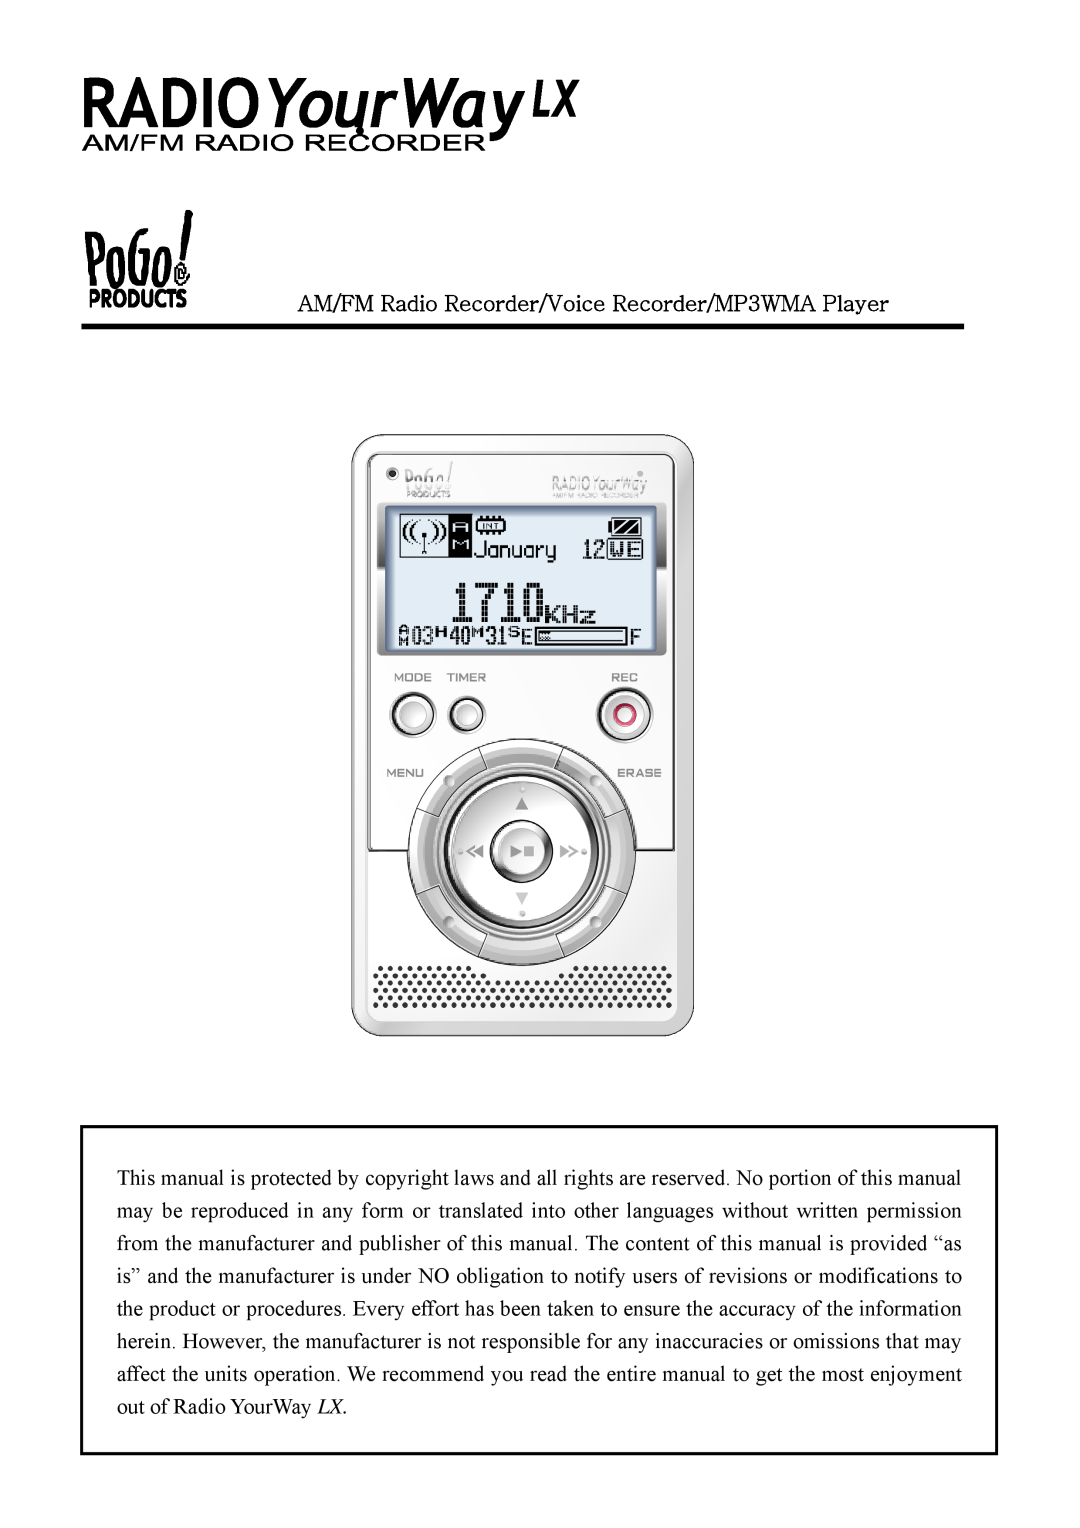 PoGo Products AM/FM Radio Recorder/Voice Recorder/MP3WMA Player manual 